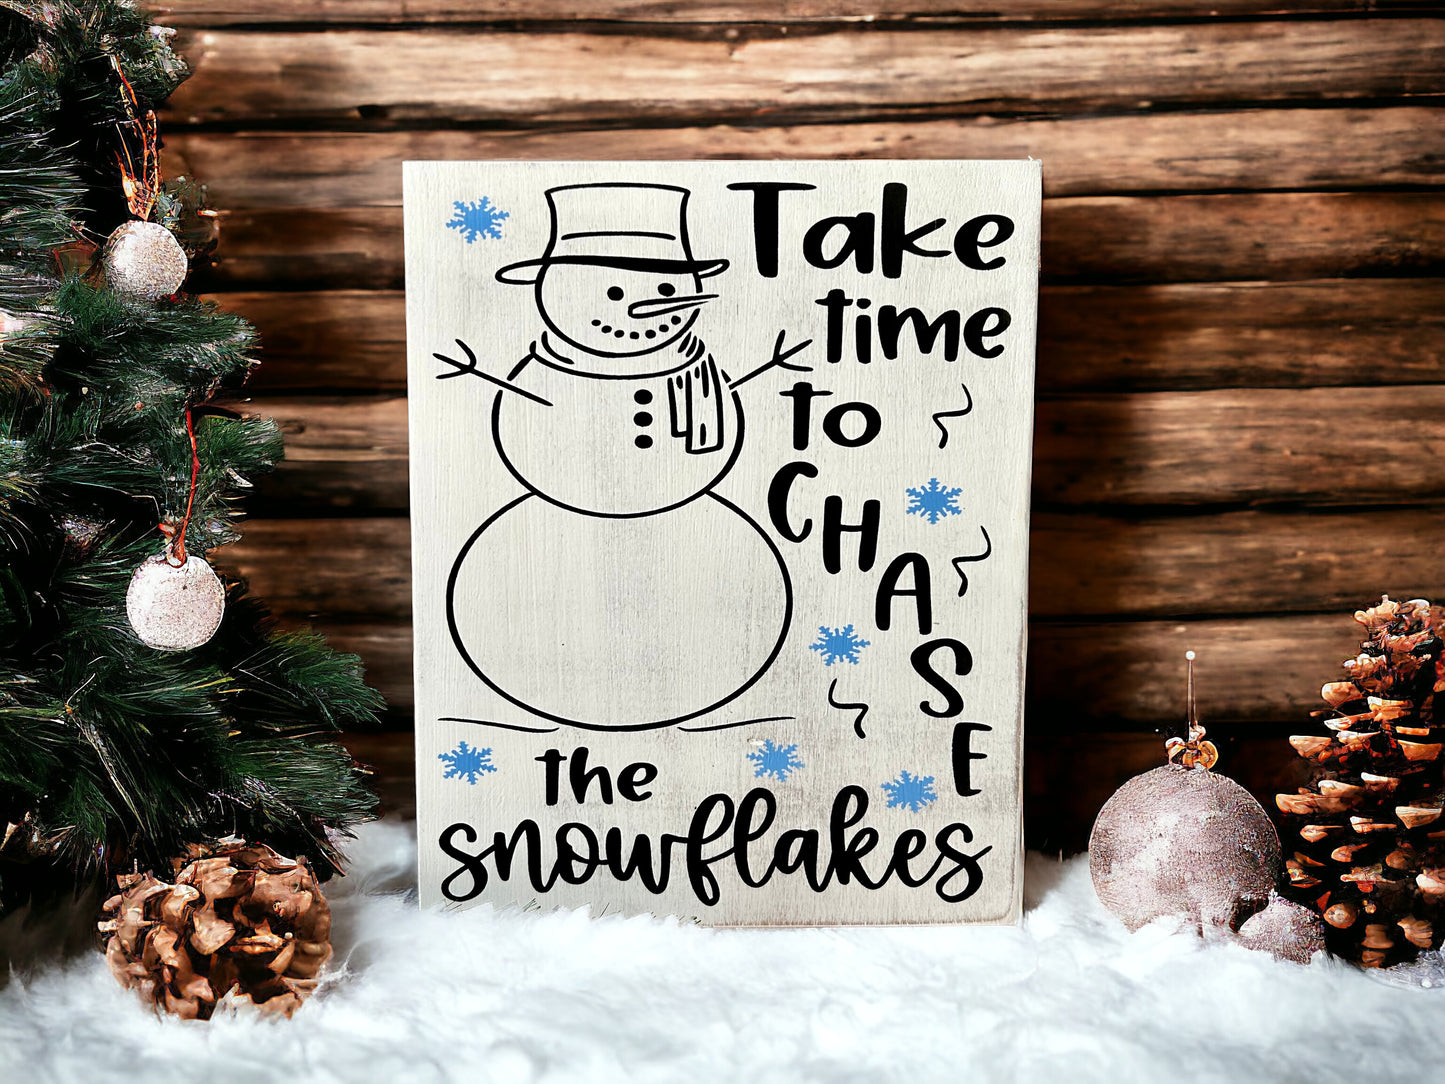 "Chase snowflakes" wood sign